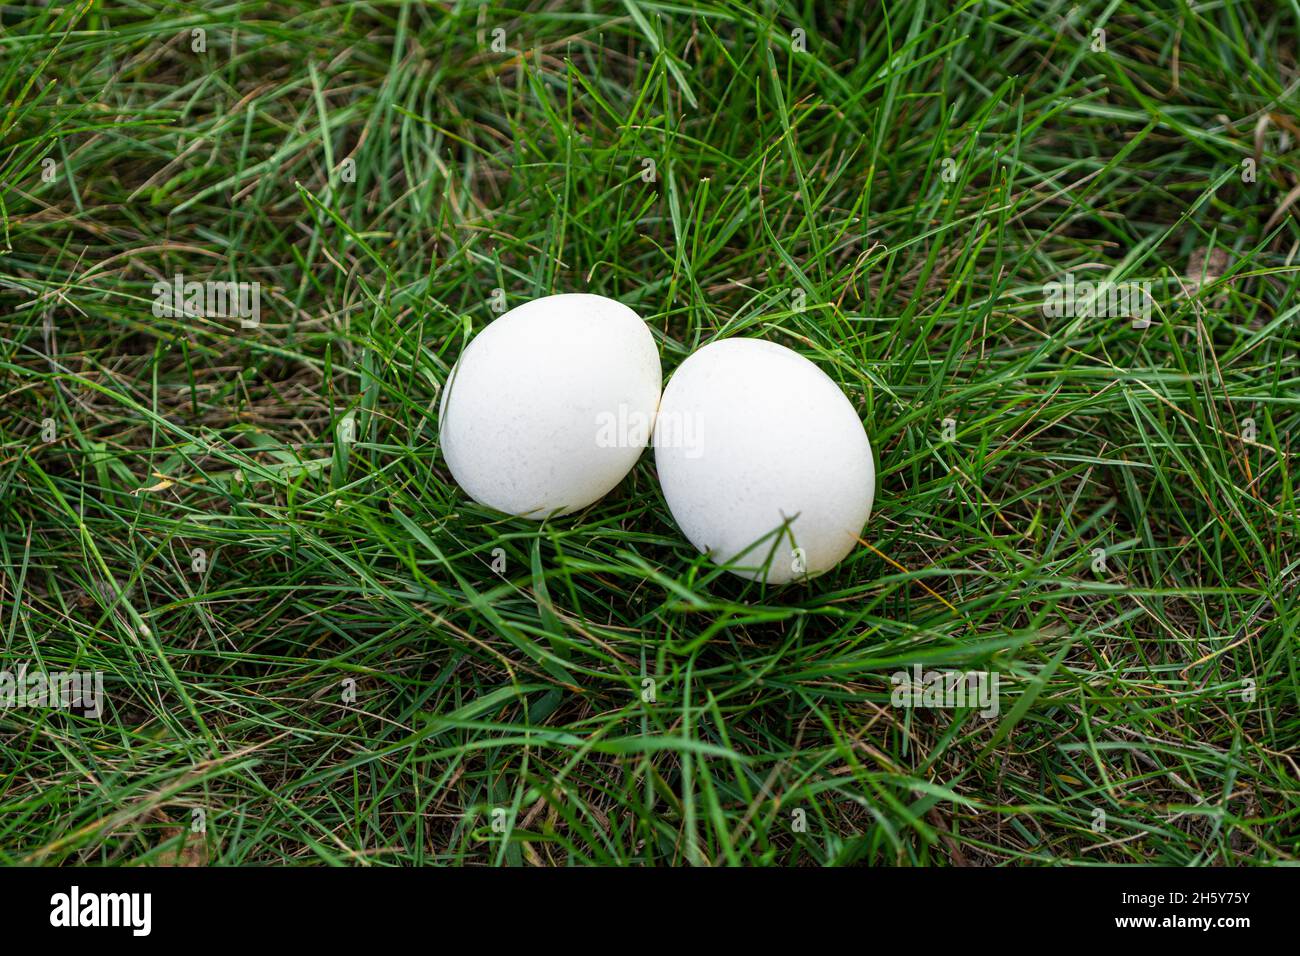 chicken egg- palatable profitable dietary natural product husbandry. two white chicken eggs are lying on the green grass. Stock Photo